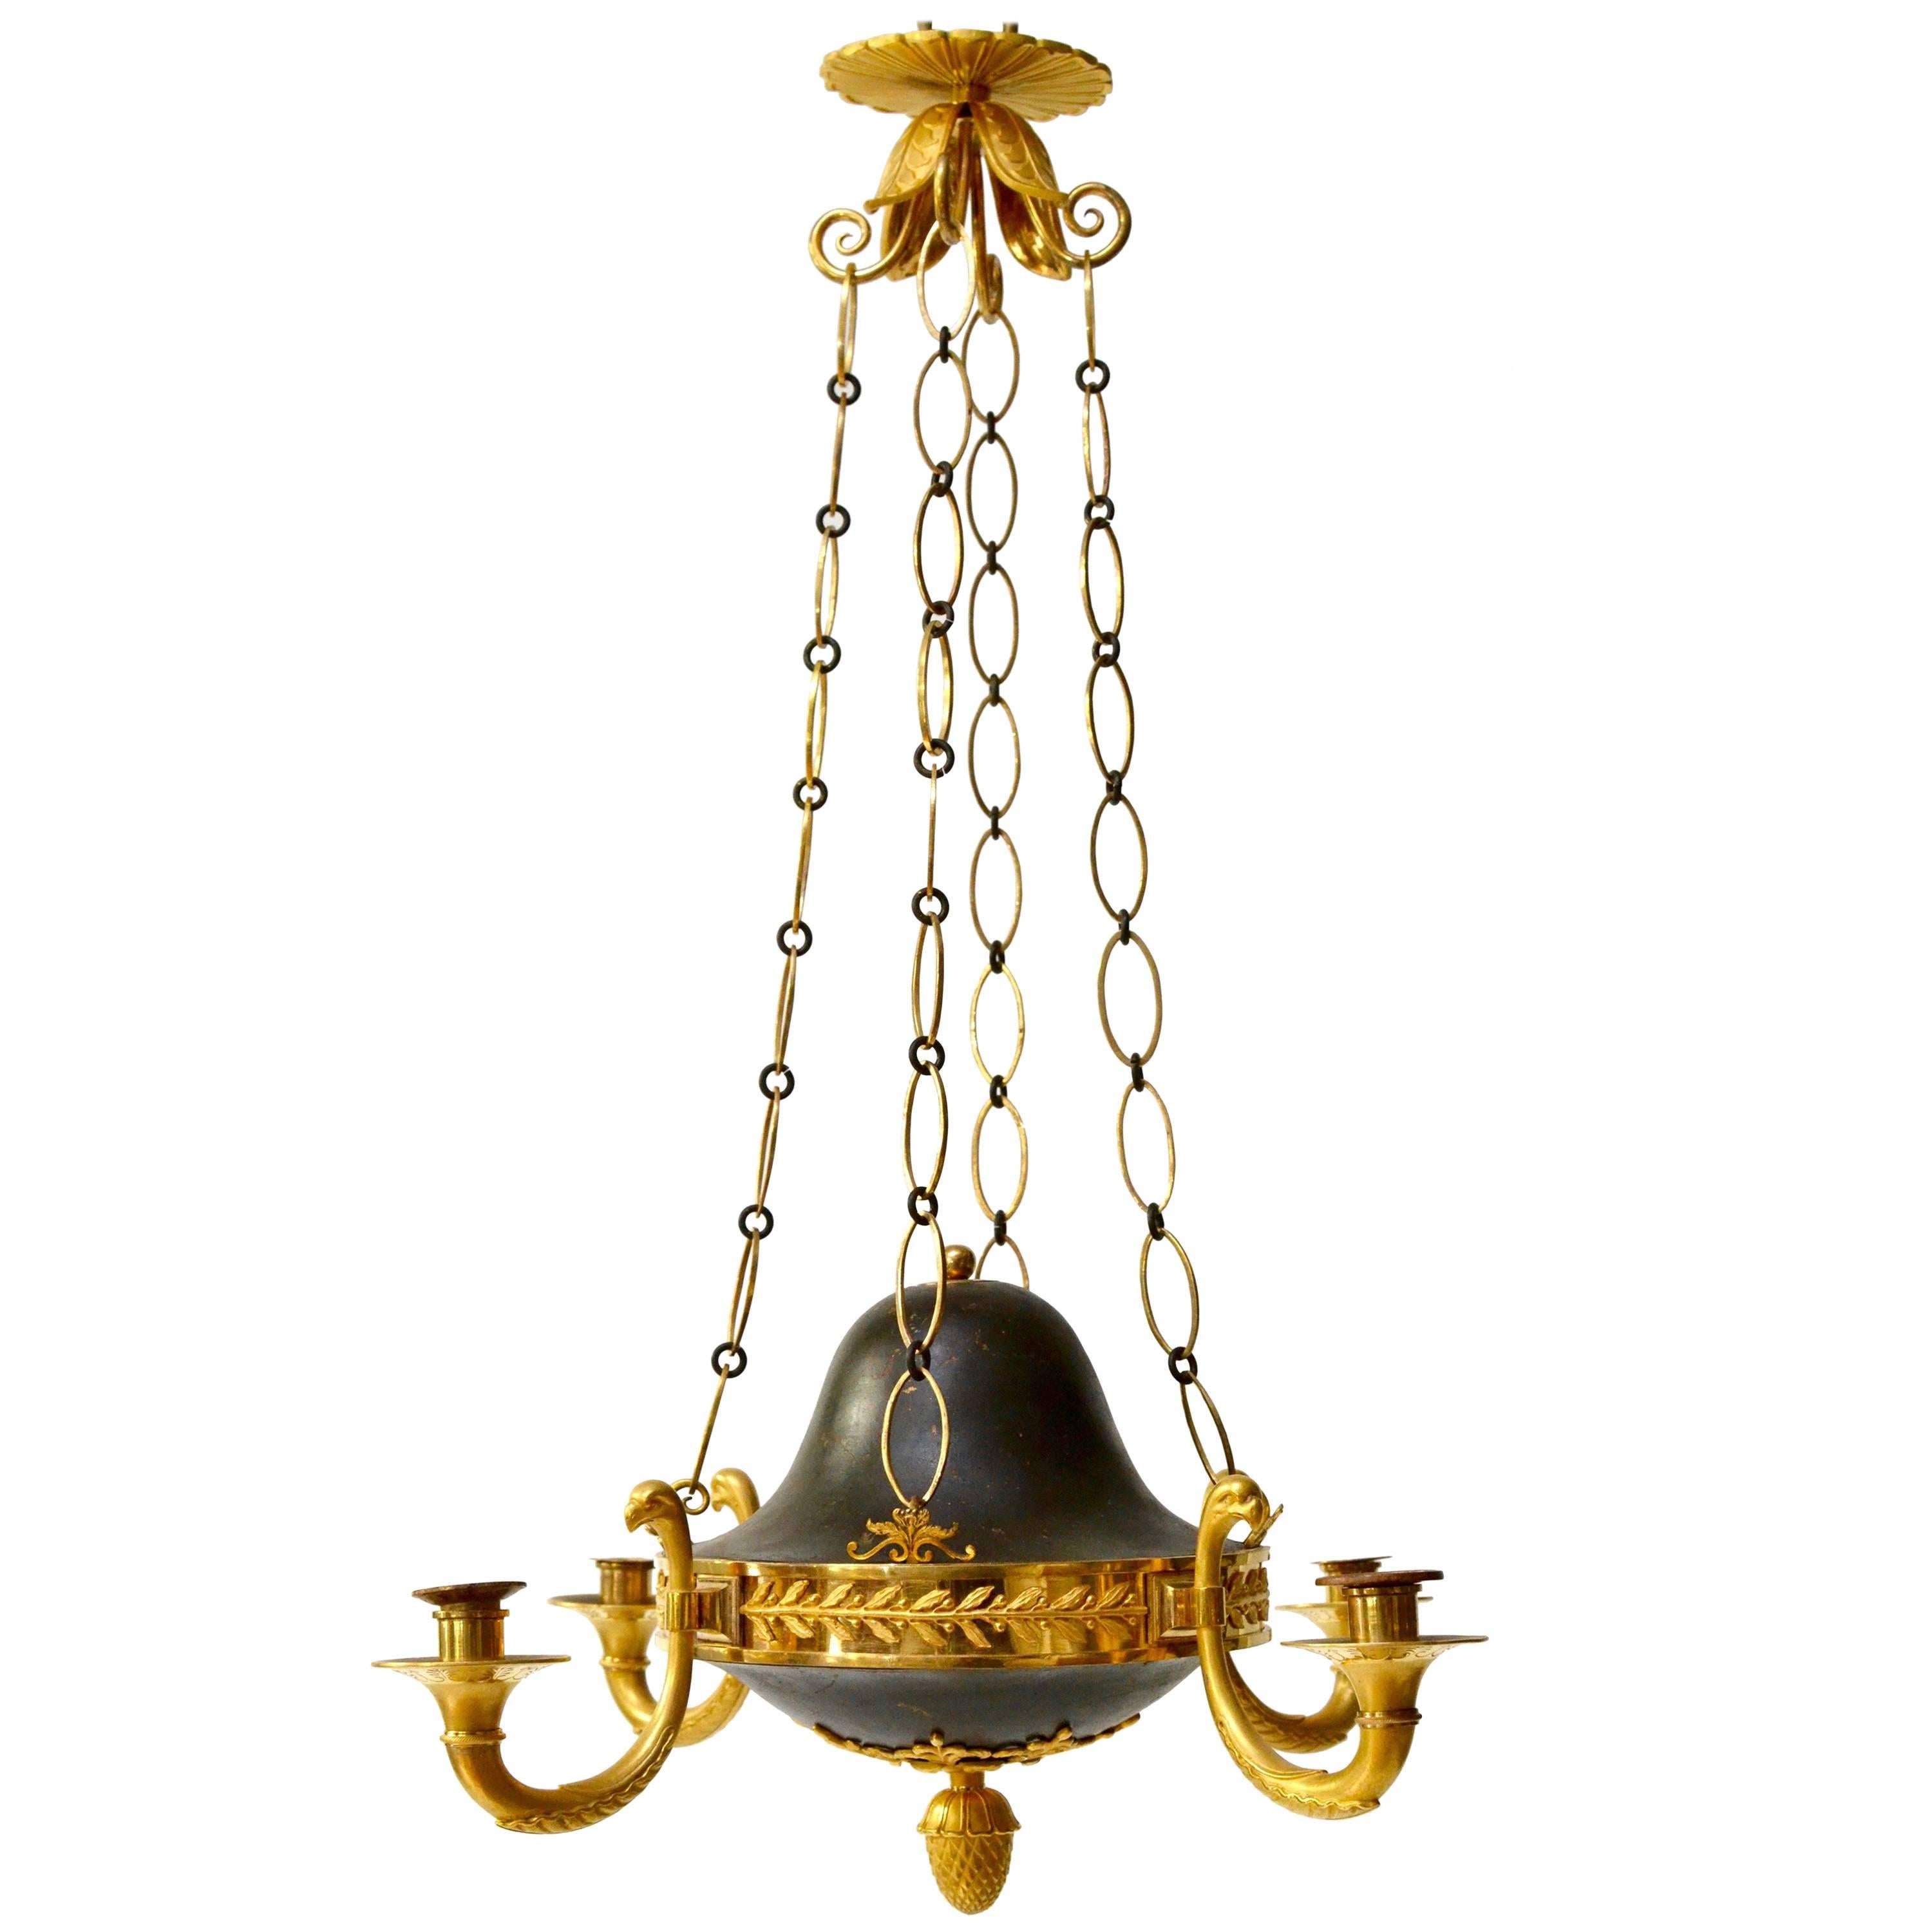 Rare Russian Gilt and Patinated Bronze Chandelier, Empire Period